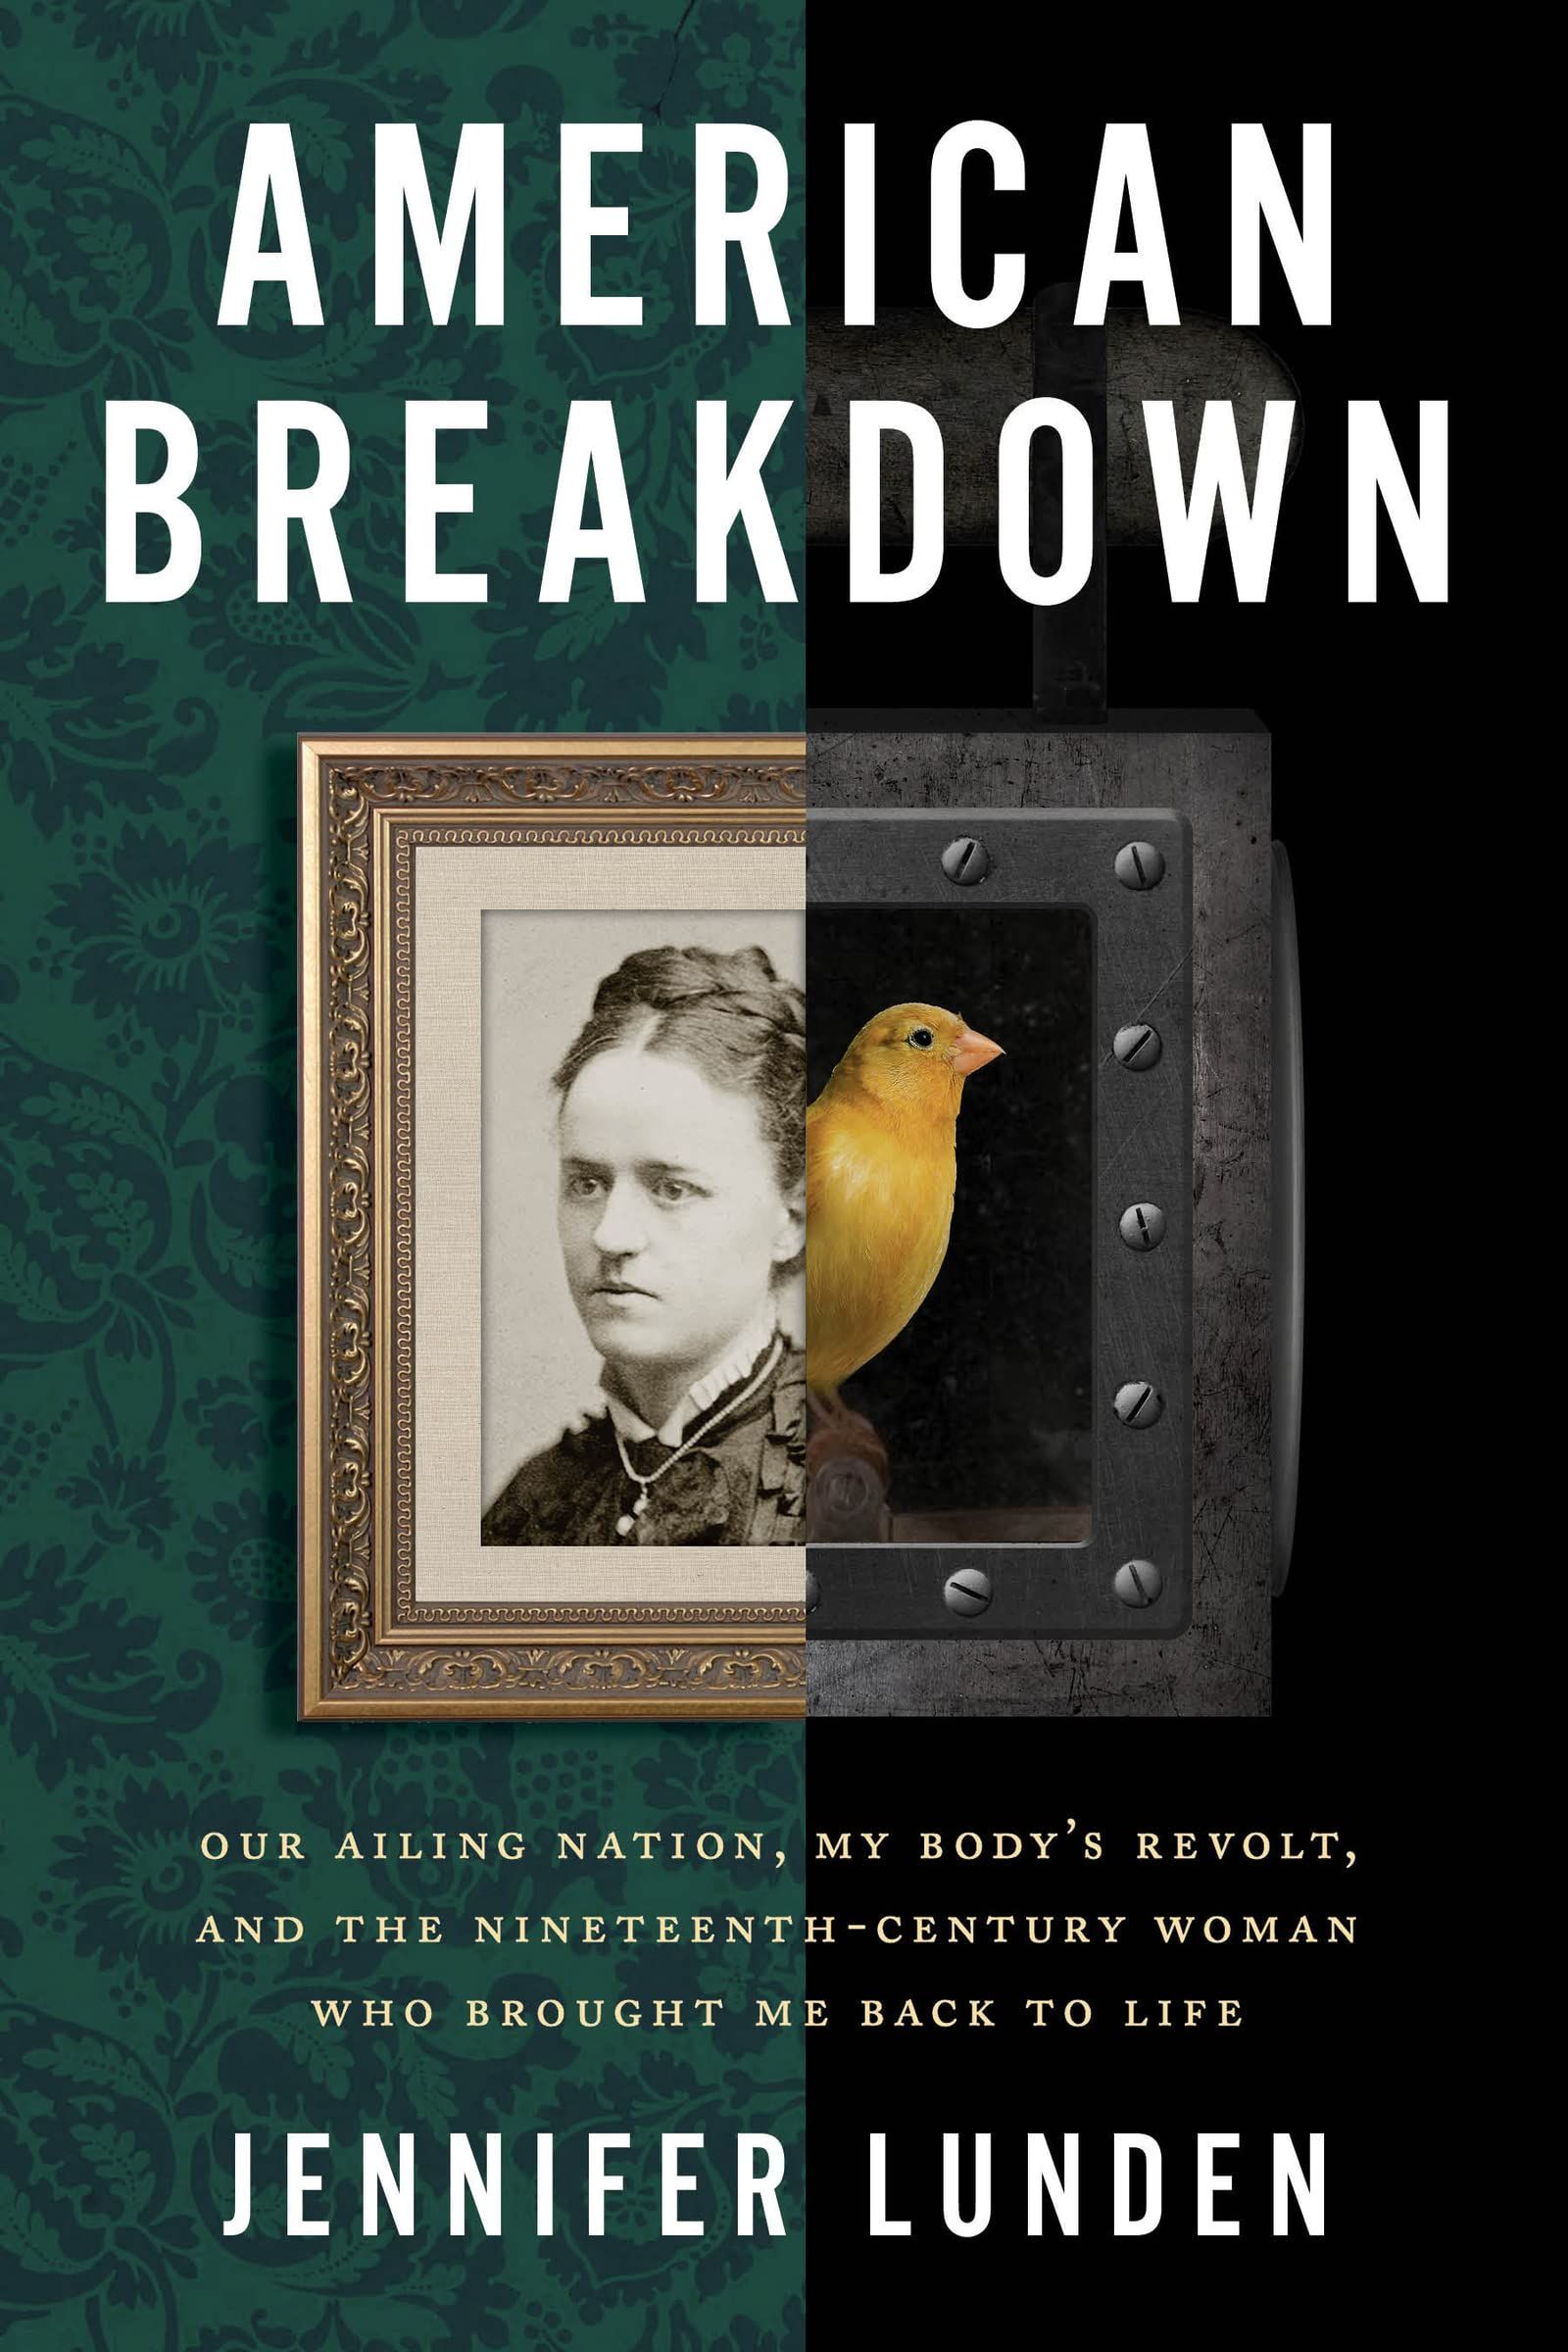 A Serious, Chronic, Complex, and Systemic Disease: On Jennifer Lunden’s “American Breakdown”